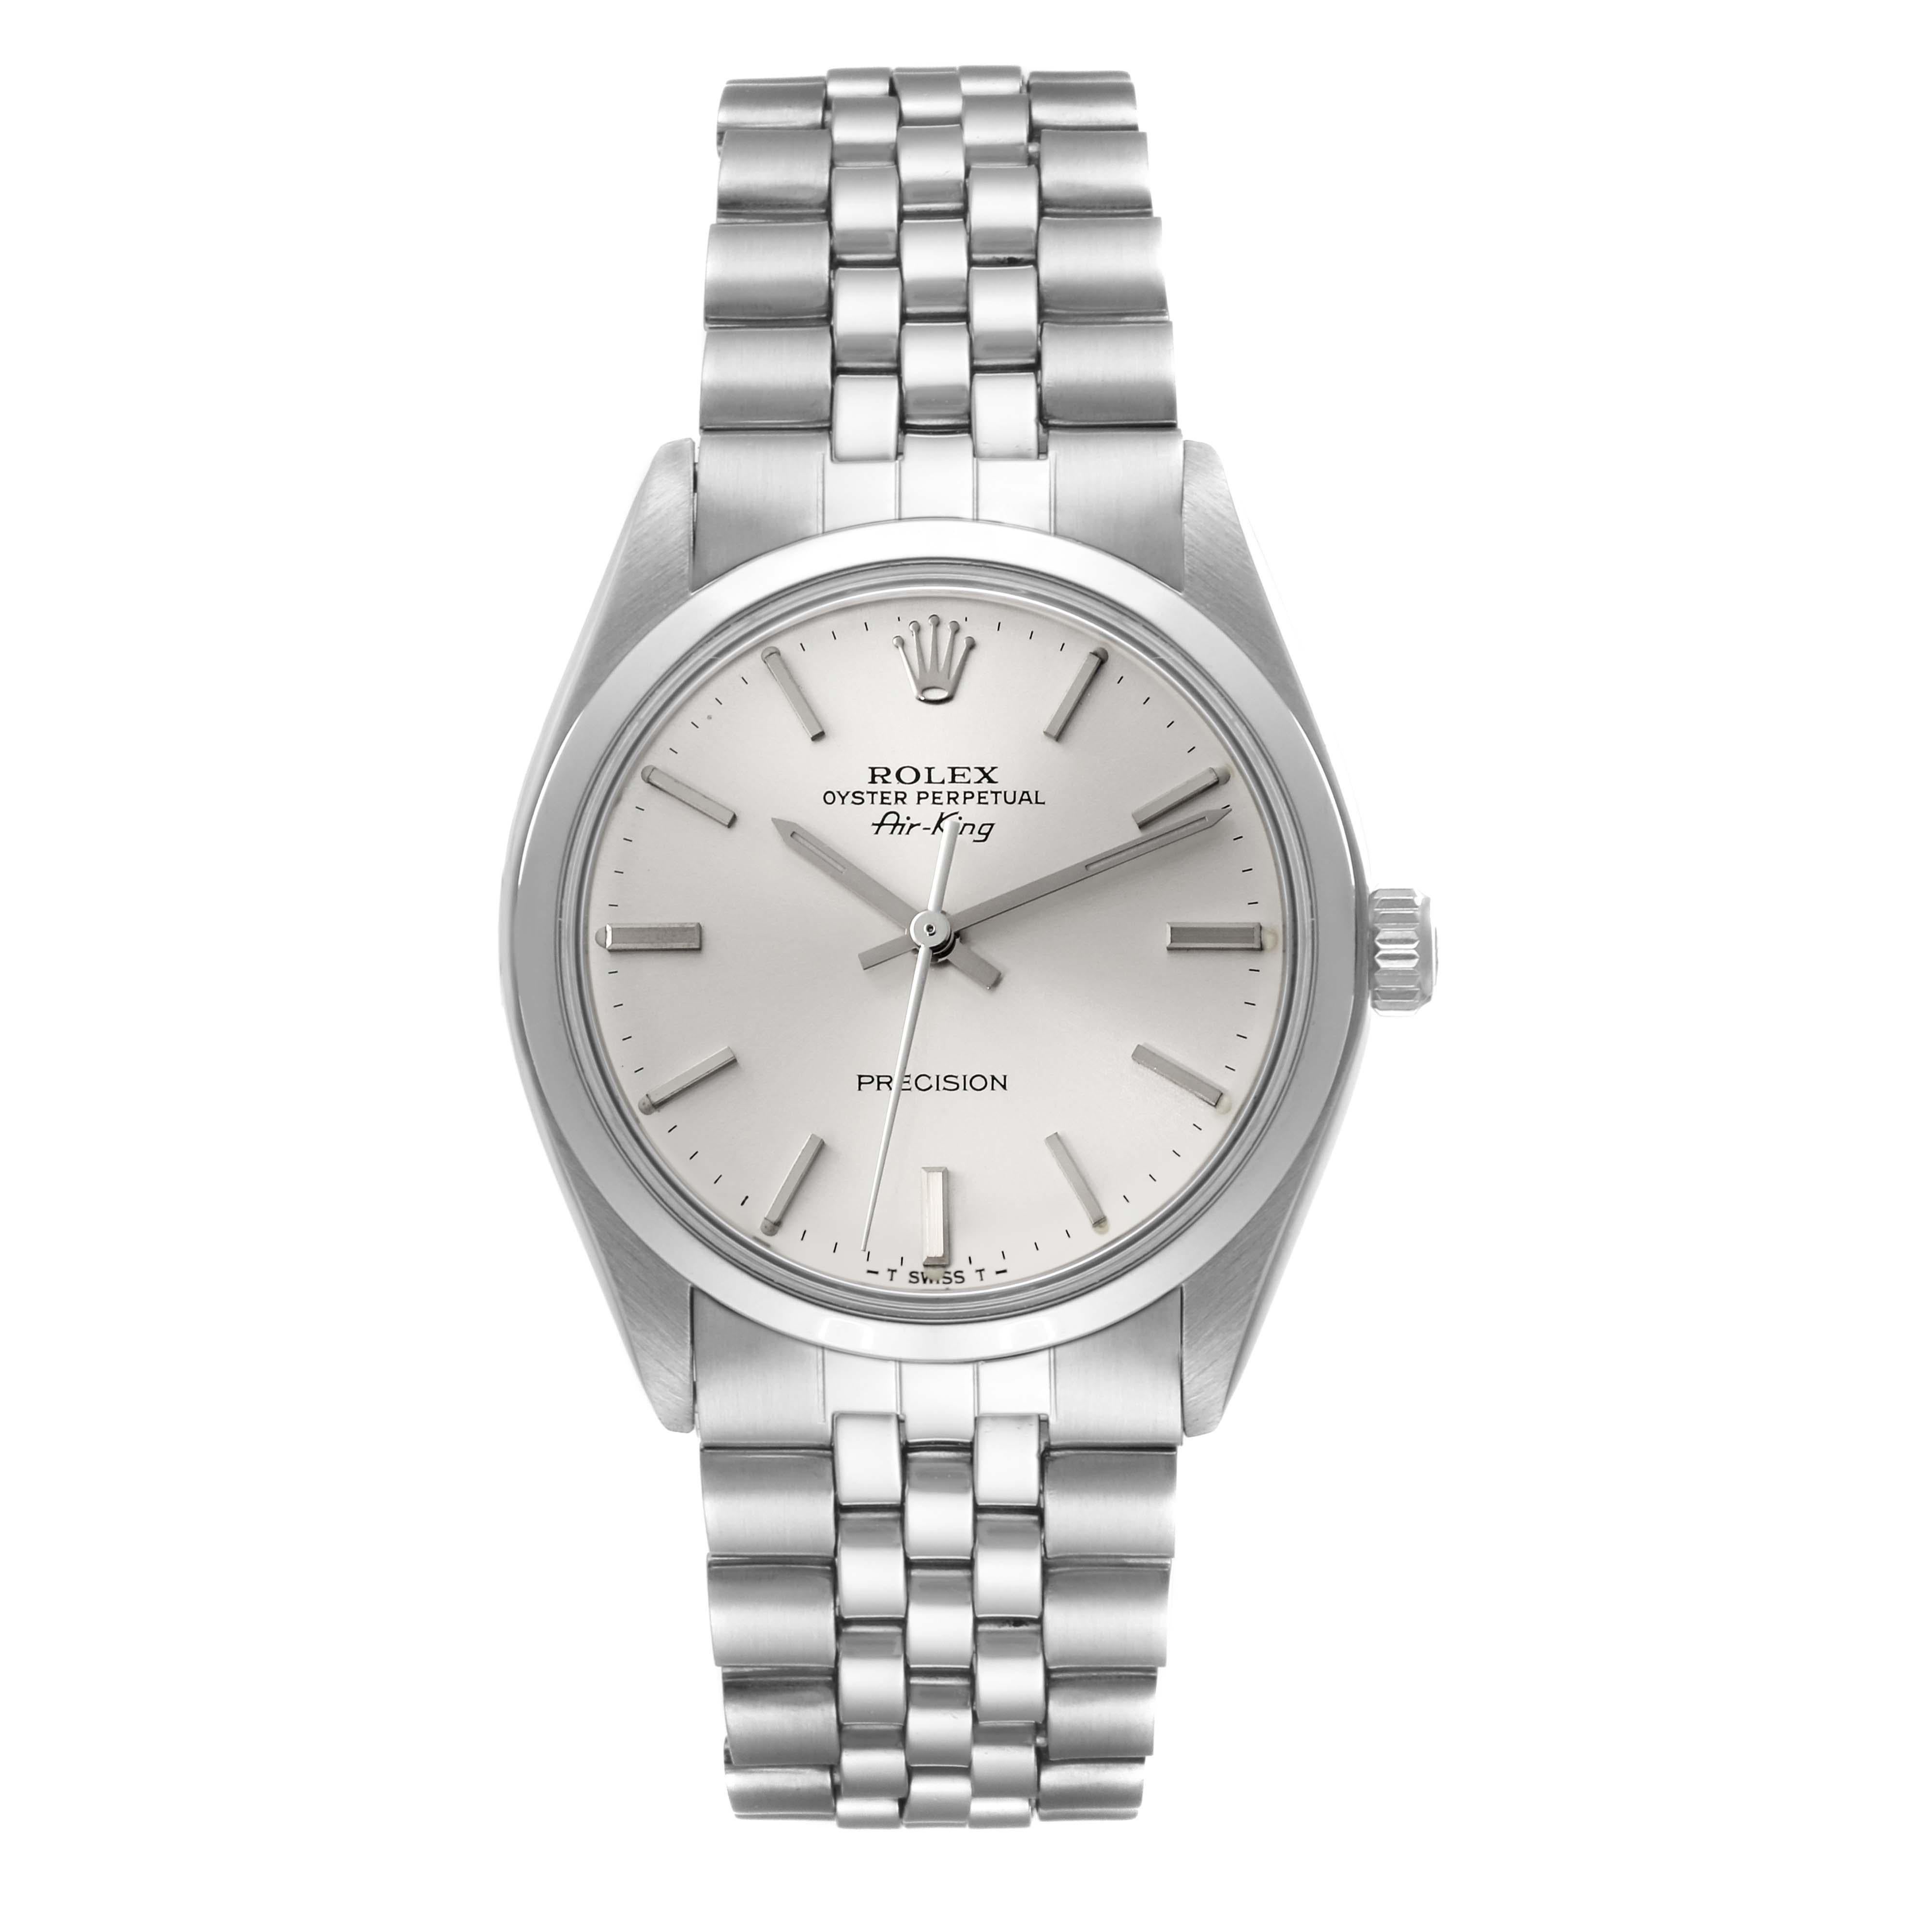 Rolex Air King Precision Silver Dial Vintage Steel Mens Watch 5500. Automatic self-winding movement. Stainless steel case 34.0 mm in diameter.  Rolex logo on the crown. Stainless steel smooth bezel. Domed acrylic crystal. Silver dial with baton hour